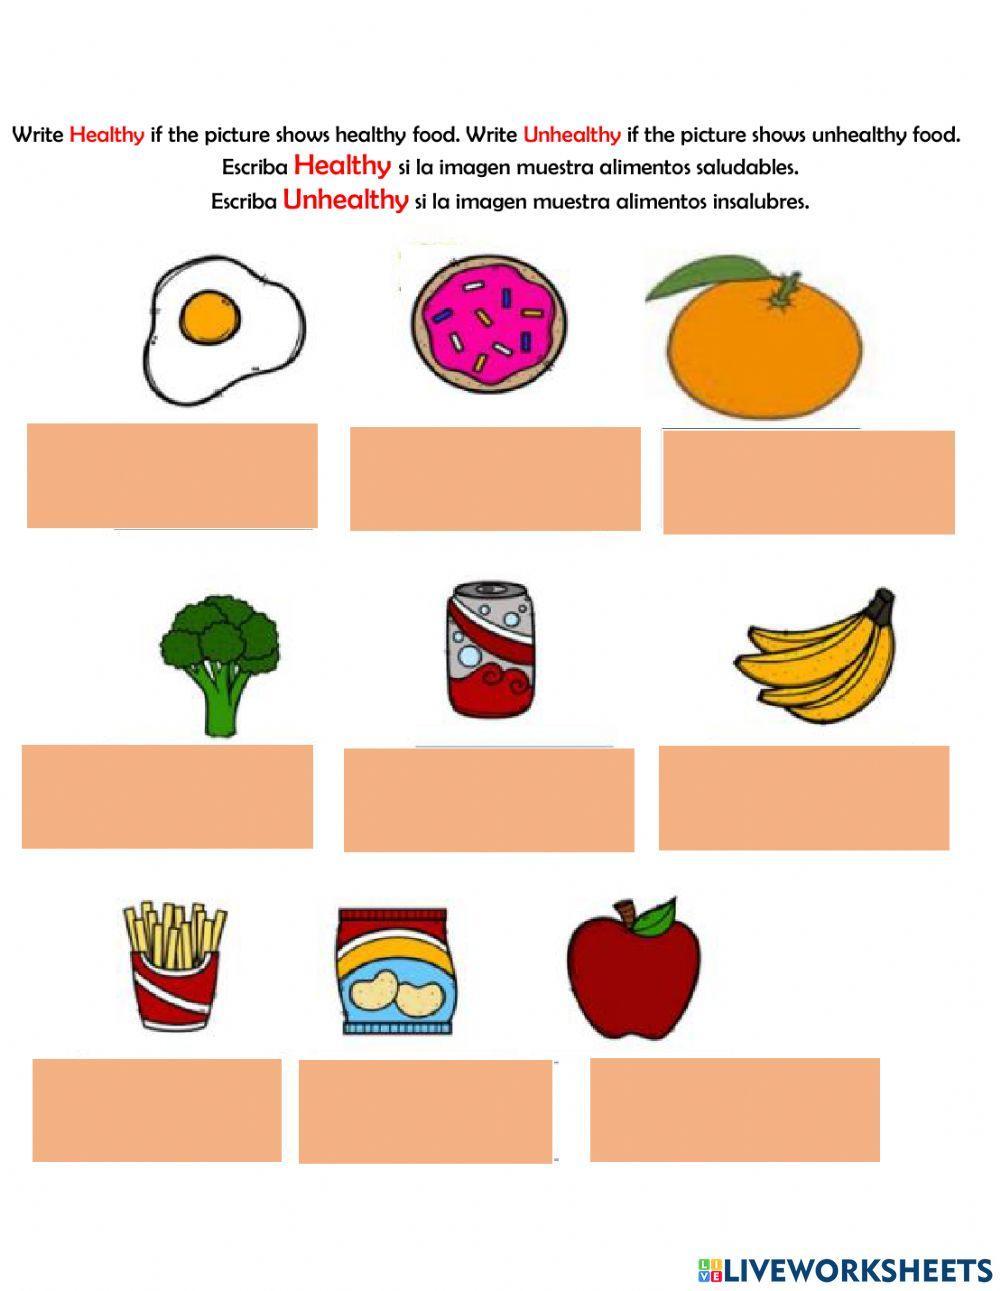 Healthy and Unhealthy foods